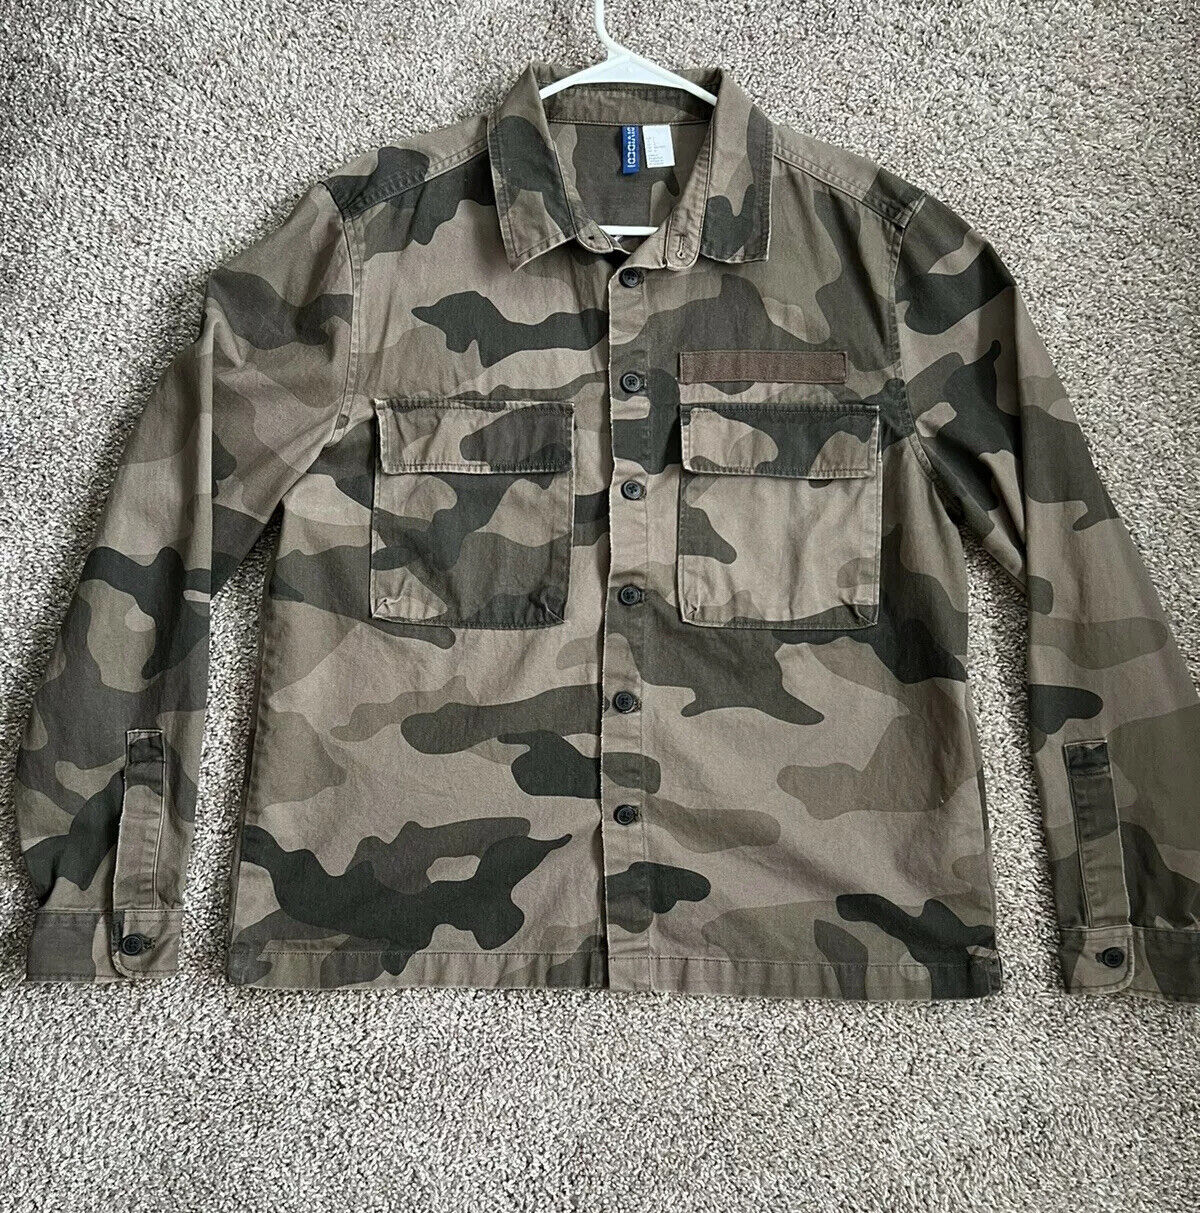 H&M Camouflage Canvas Jacket | Size | Embroidered Back | Divided Camo Army | eBay